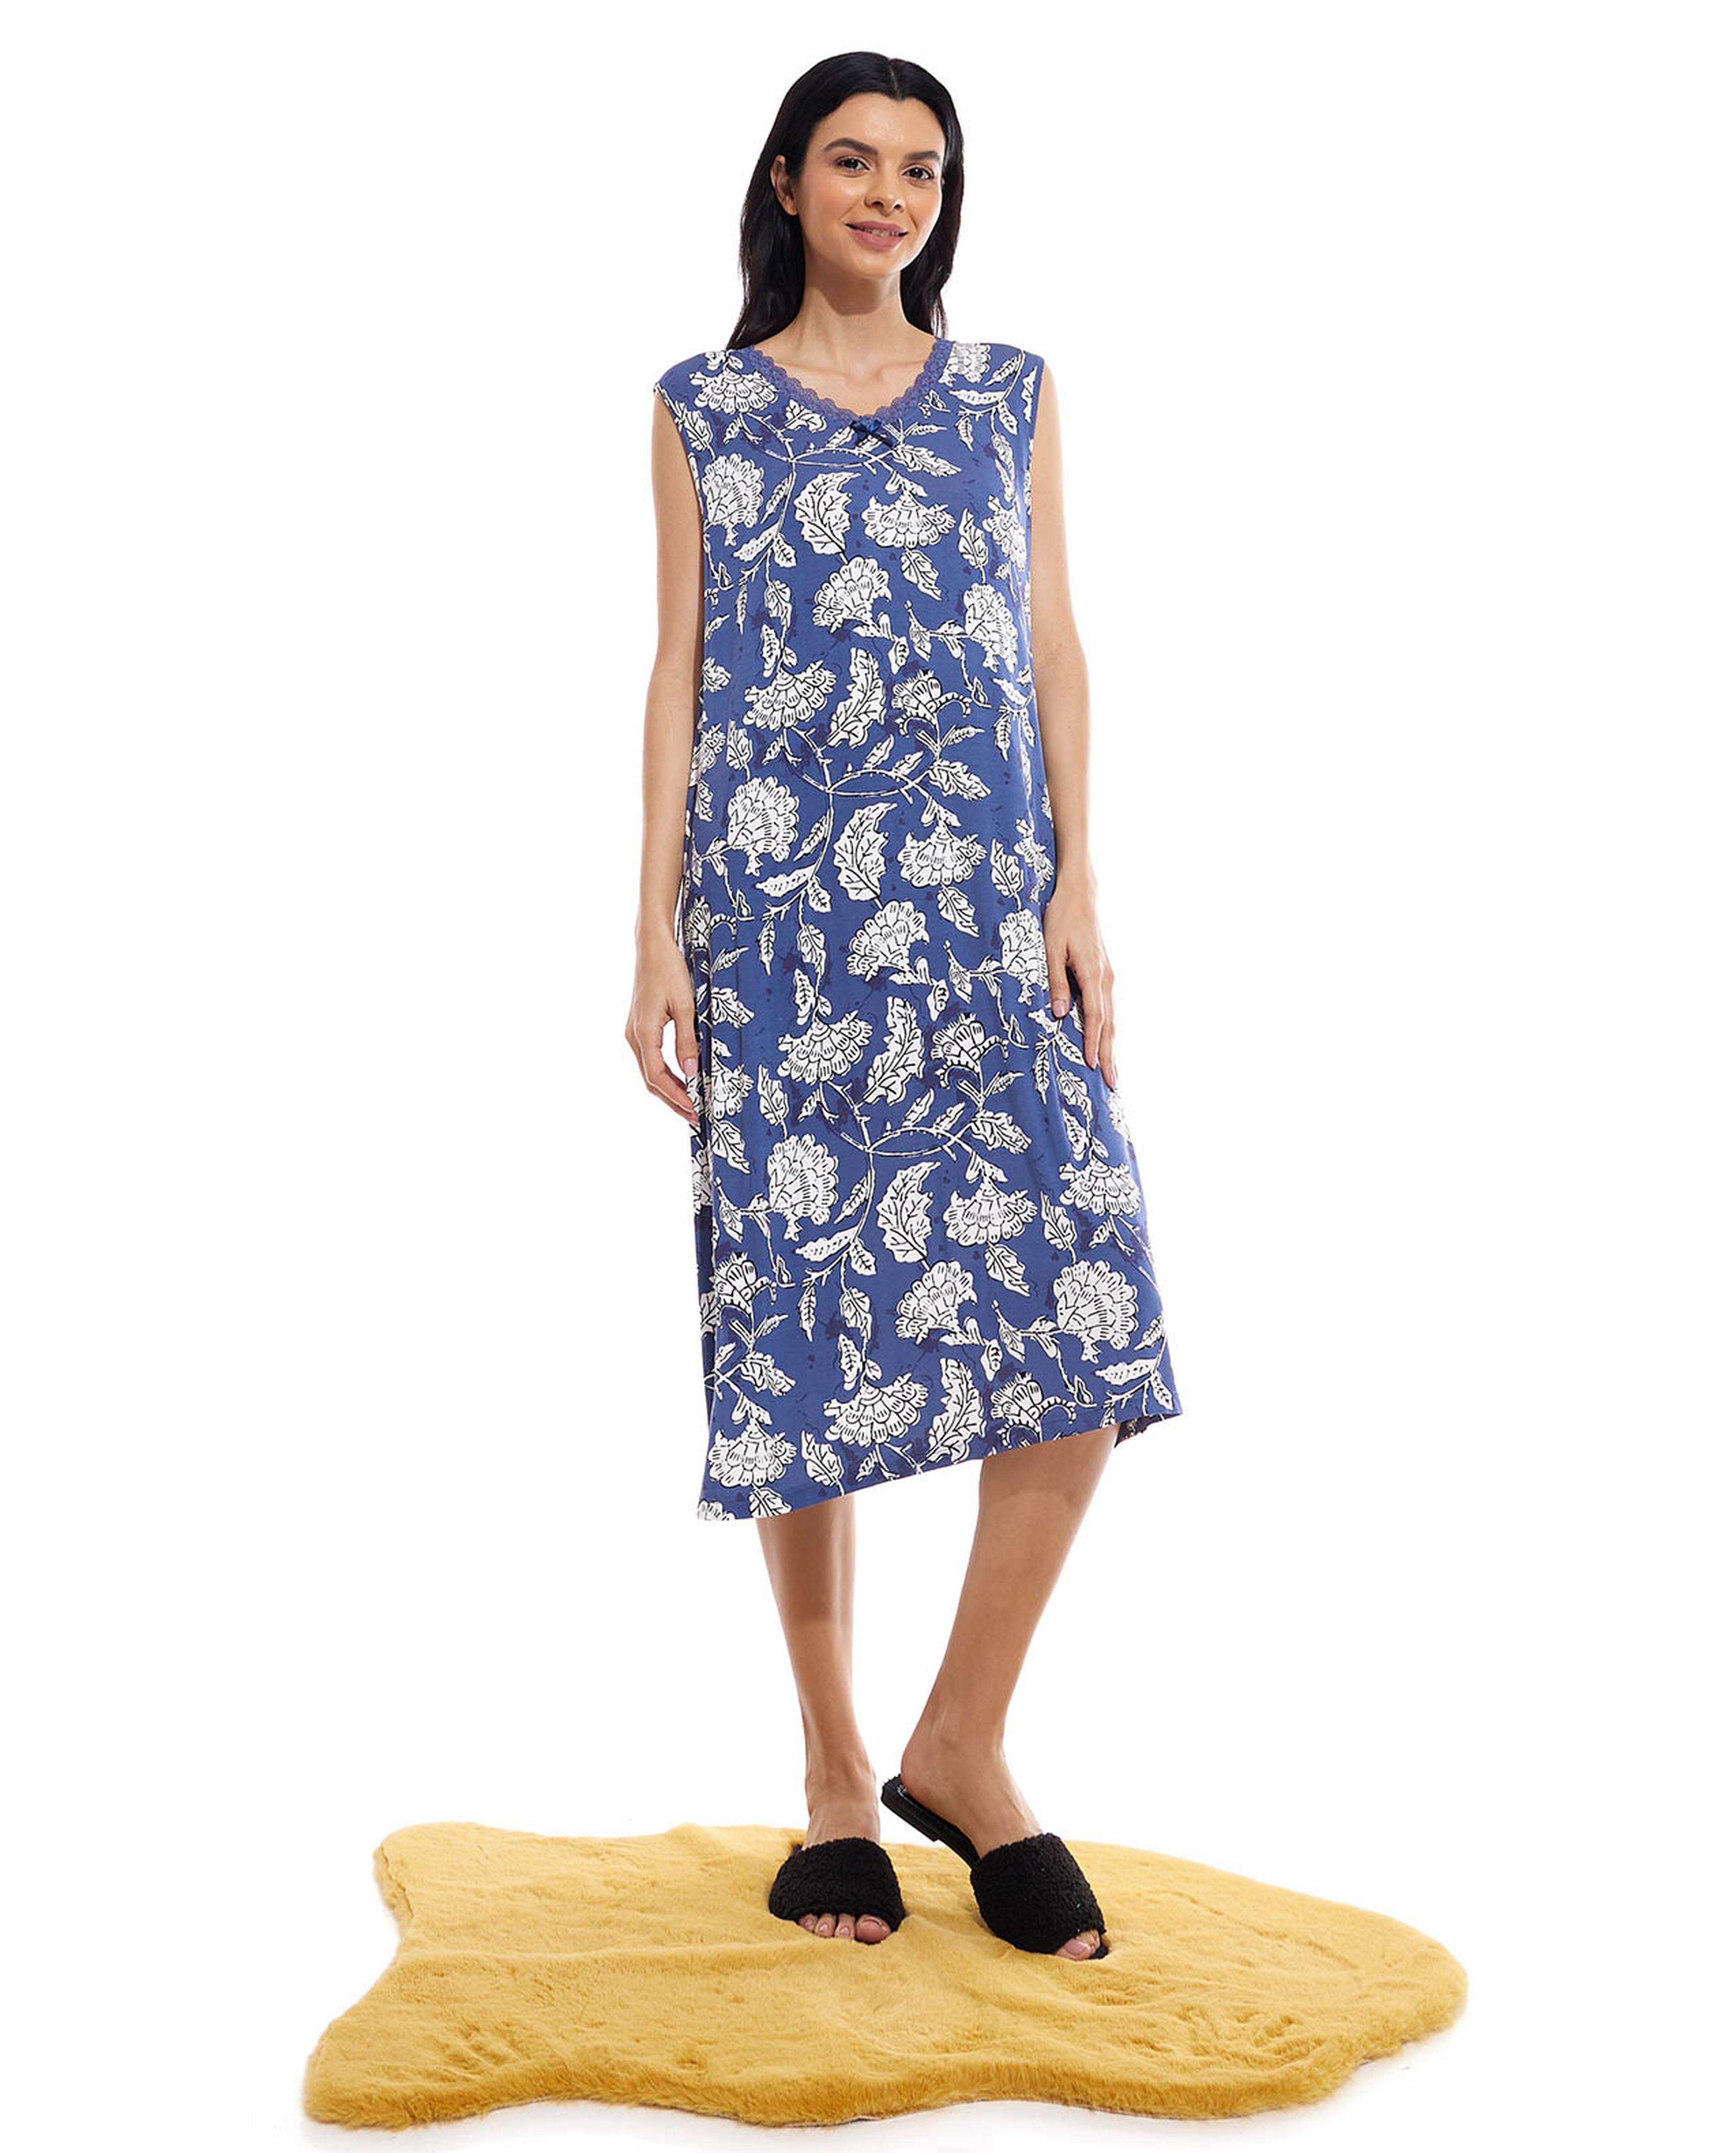 Floral Print Sleeveless Nightgown with V-Neck